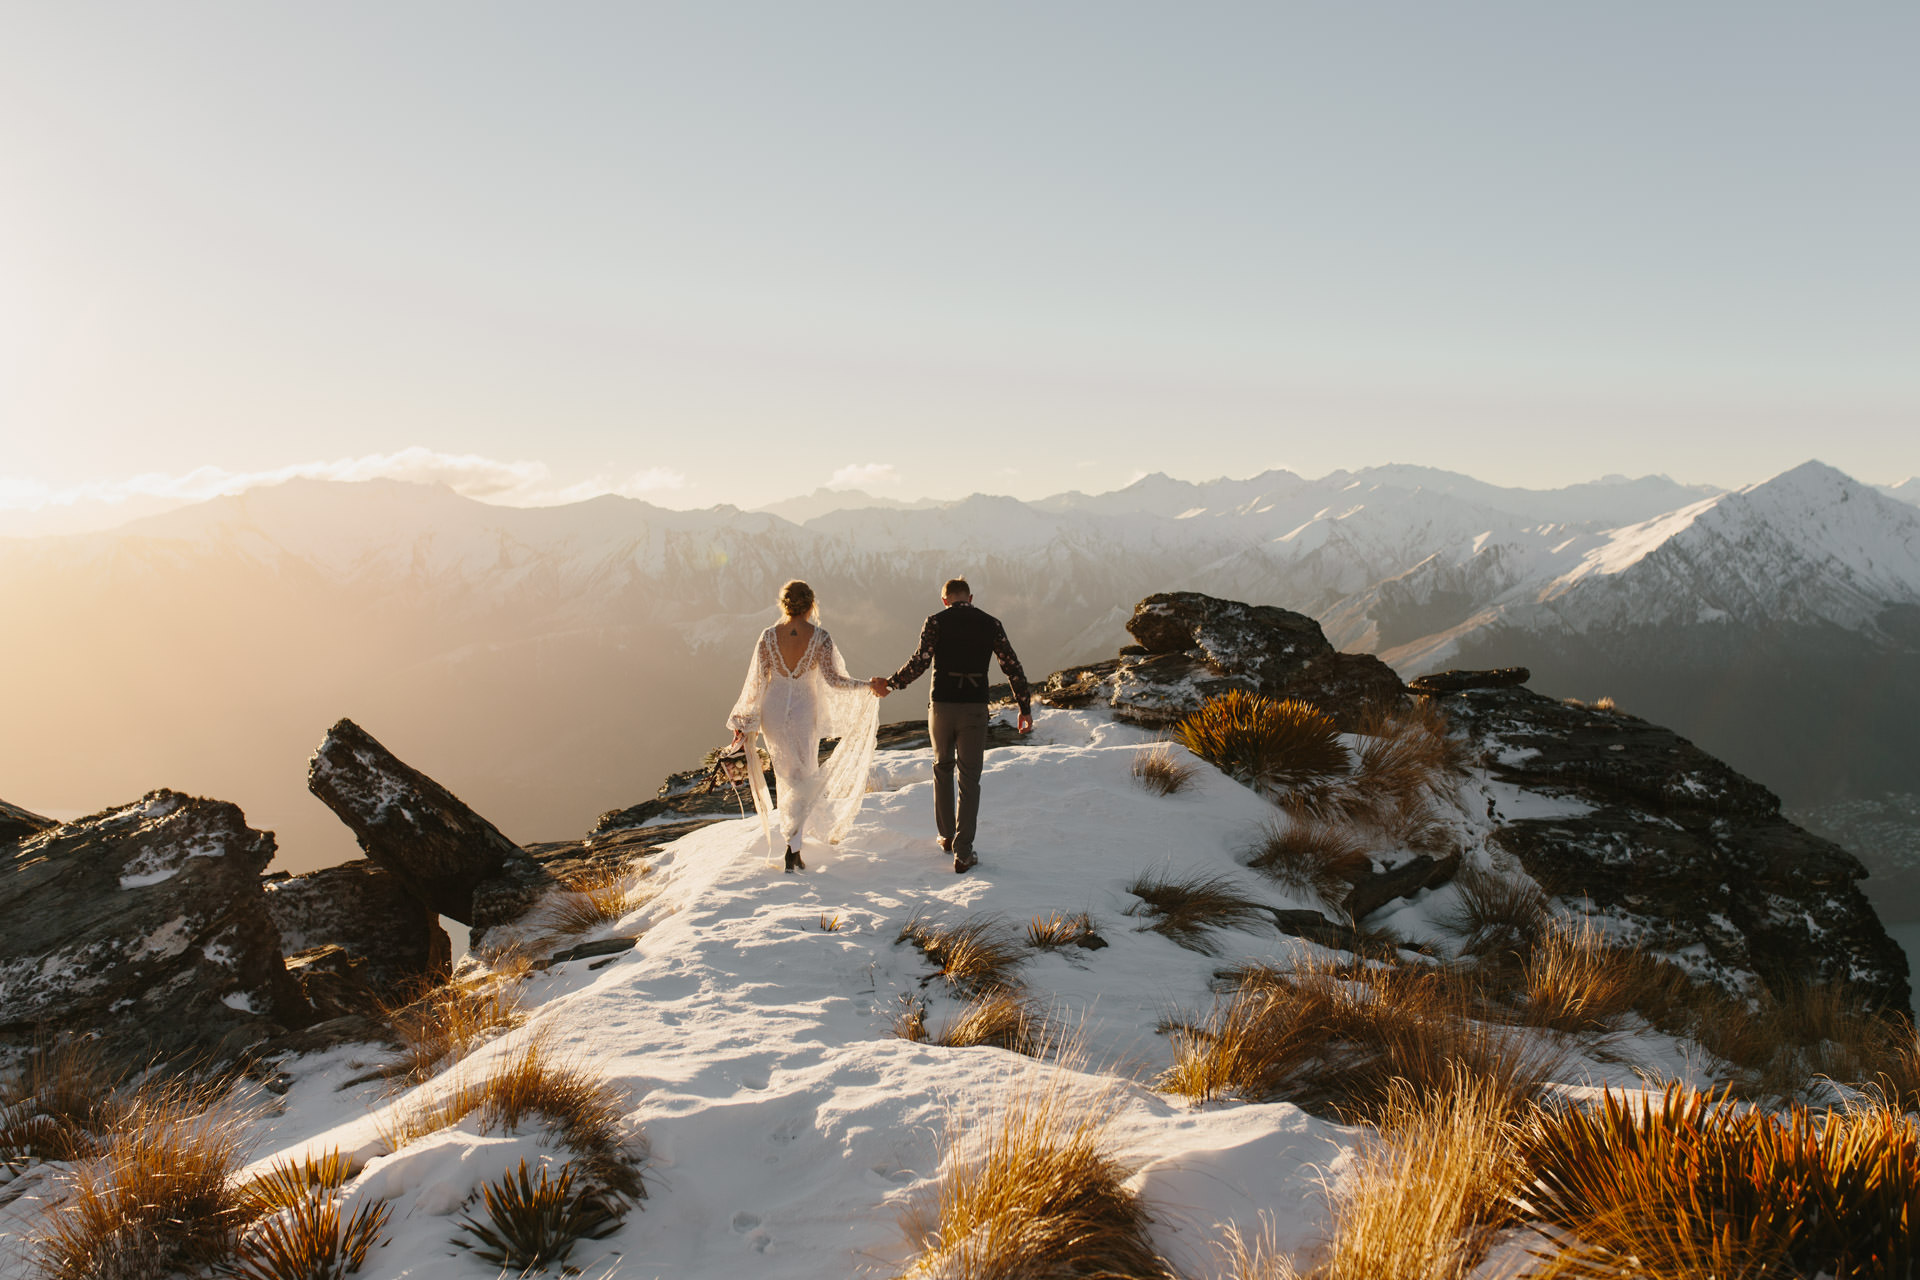 Golden hour Cecil Peak winter helicopter elopement in Queenstown New Zealand by The Lovers Elopement Co